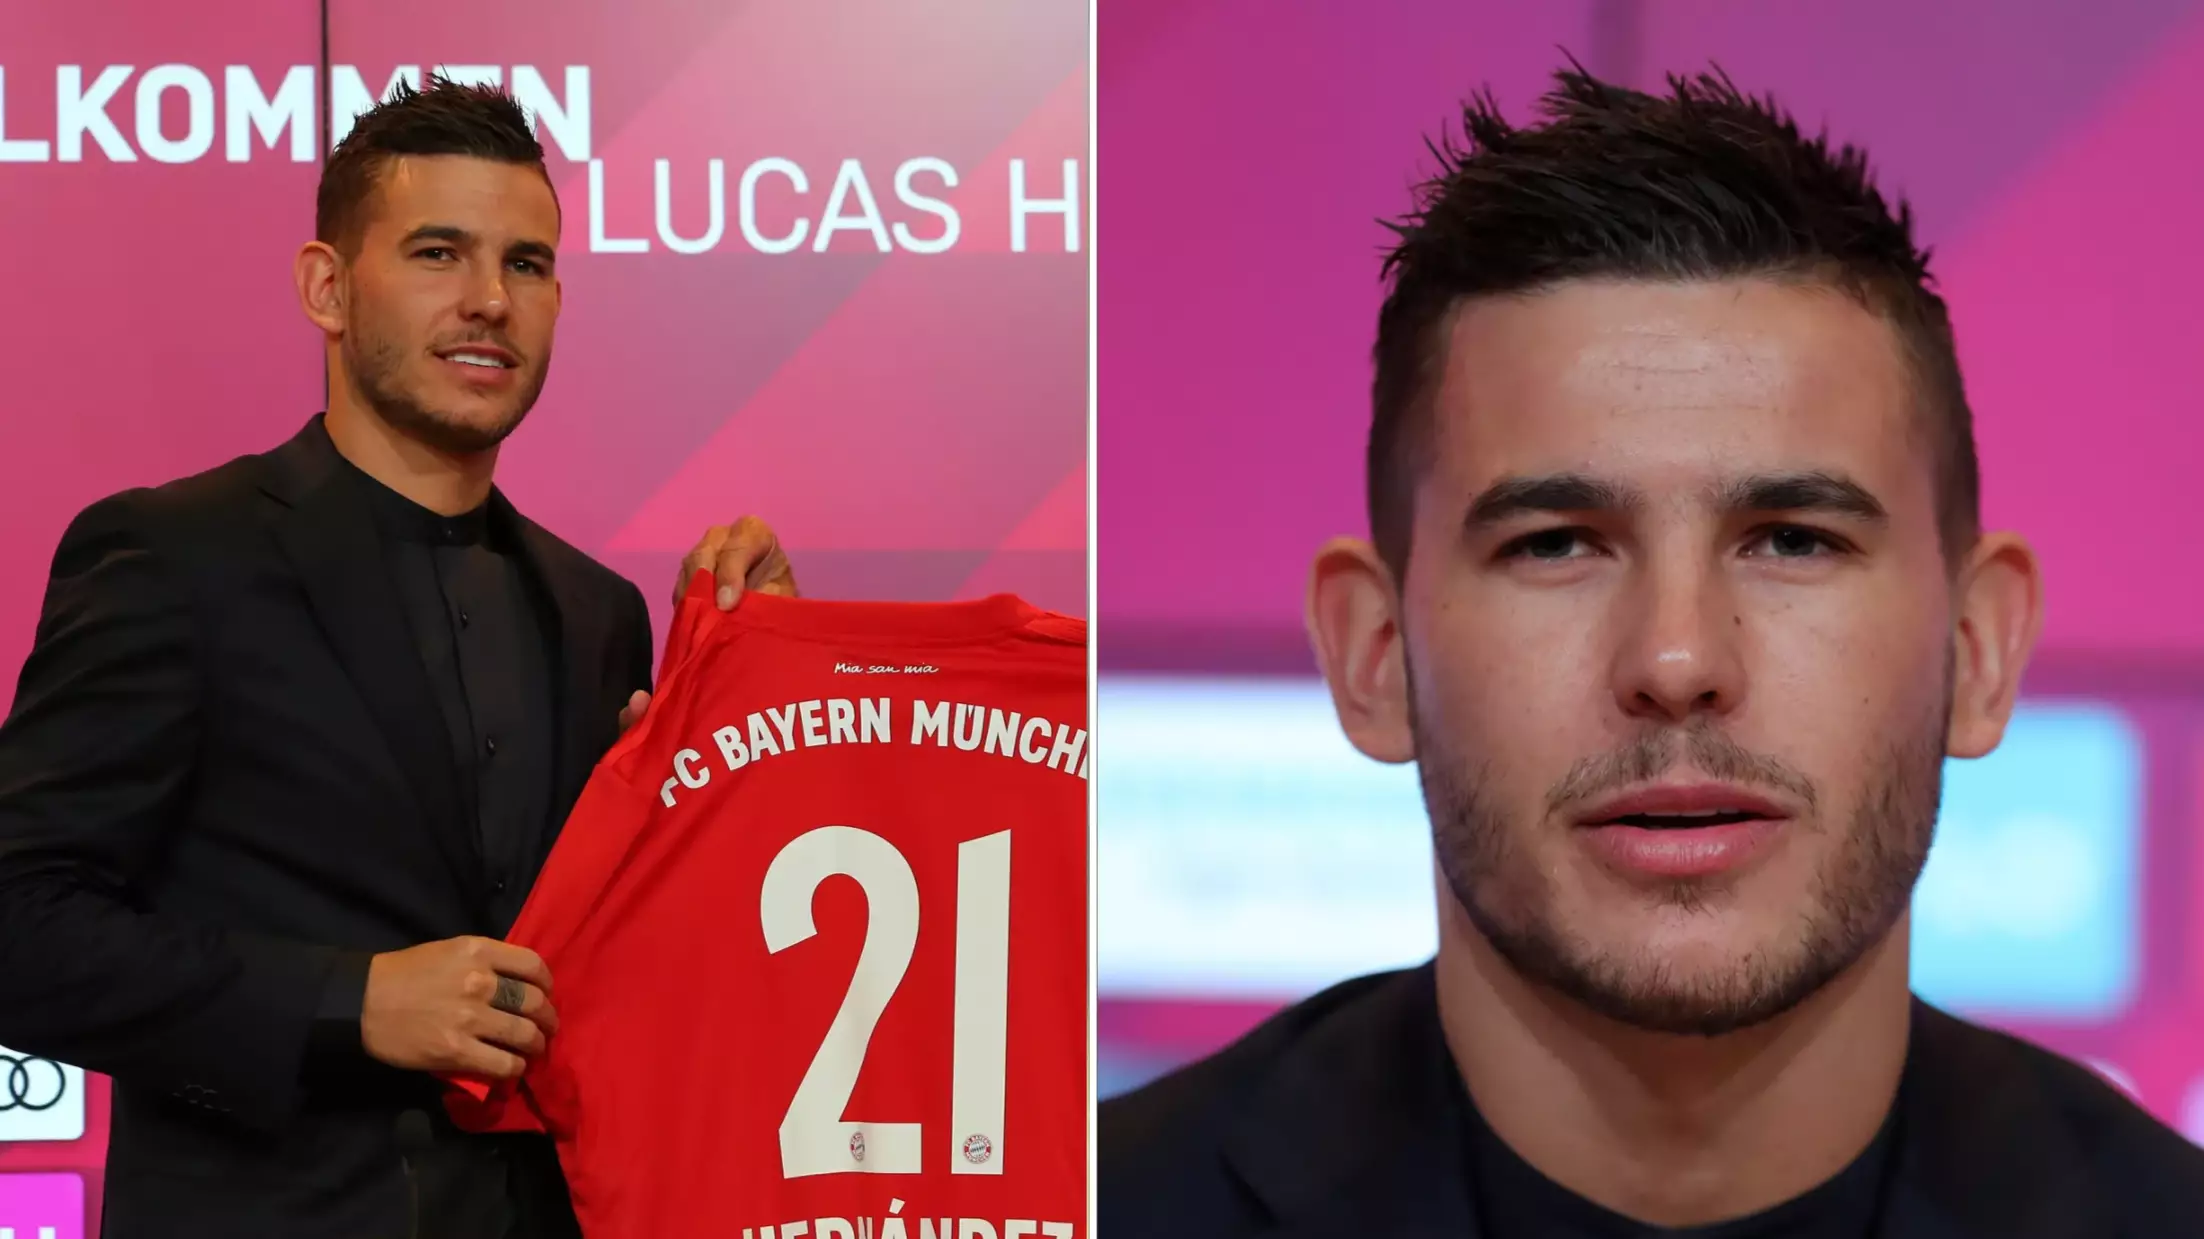 Lucas Hernández Summoned For Prison Selection Process, Faces Up To A Year In Prison